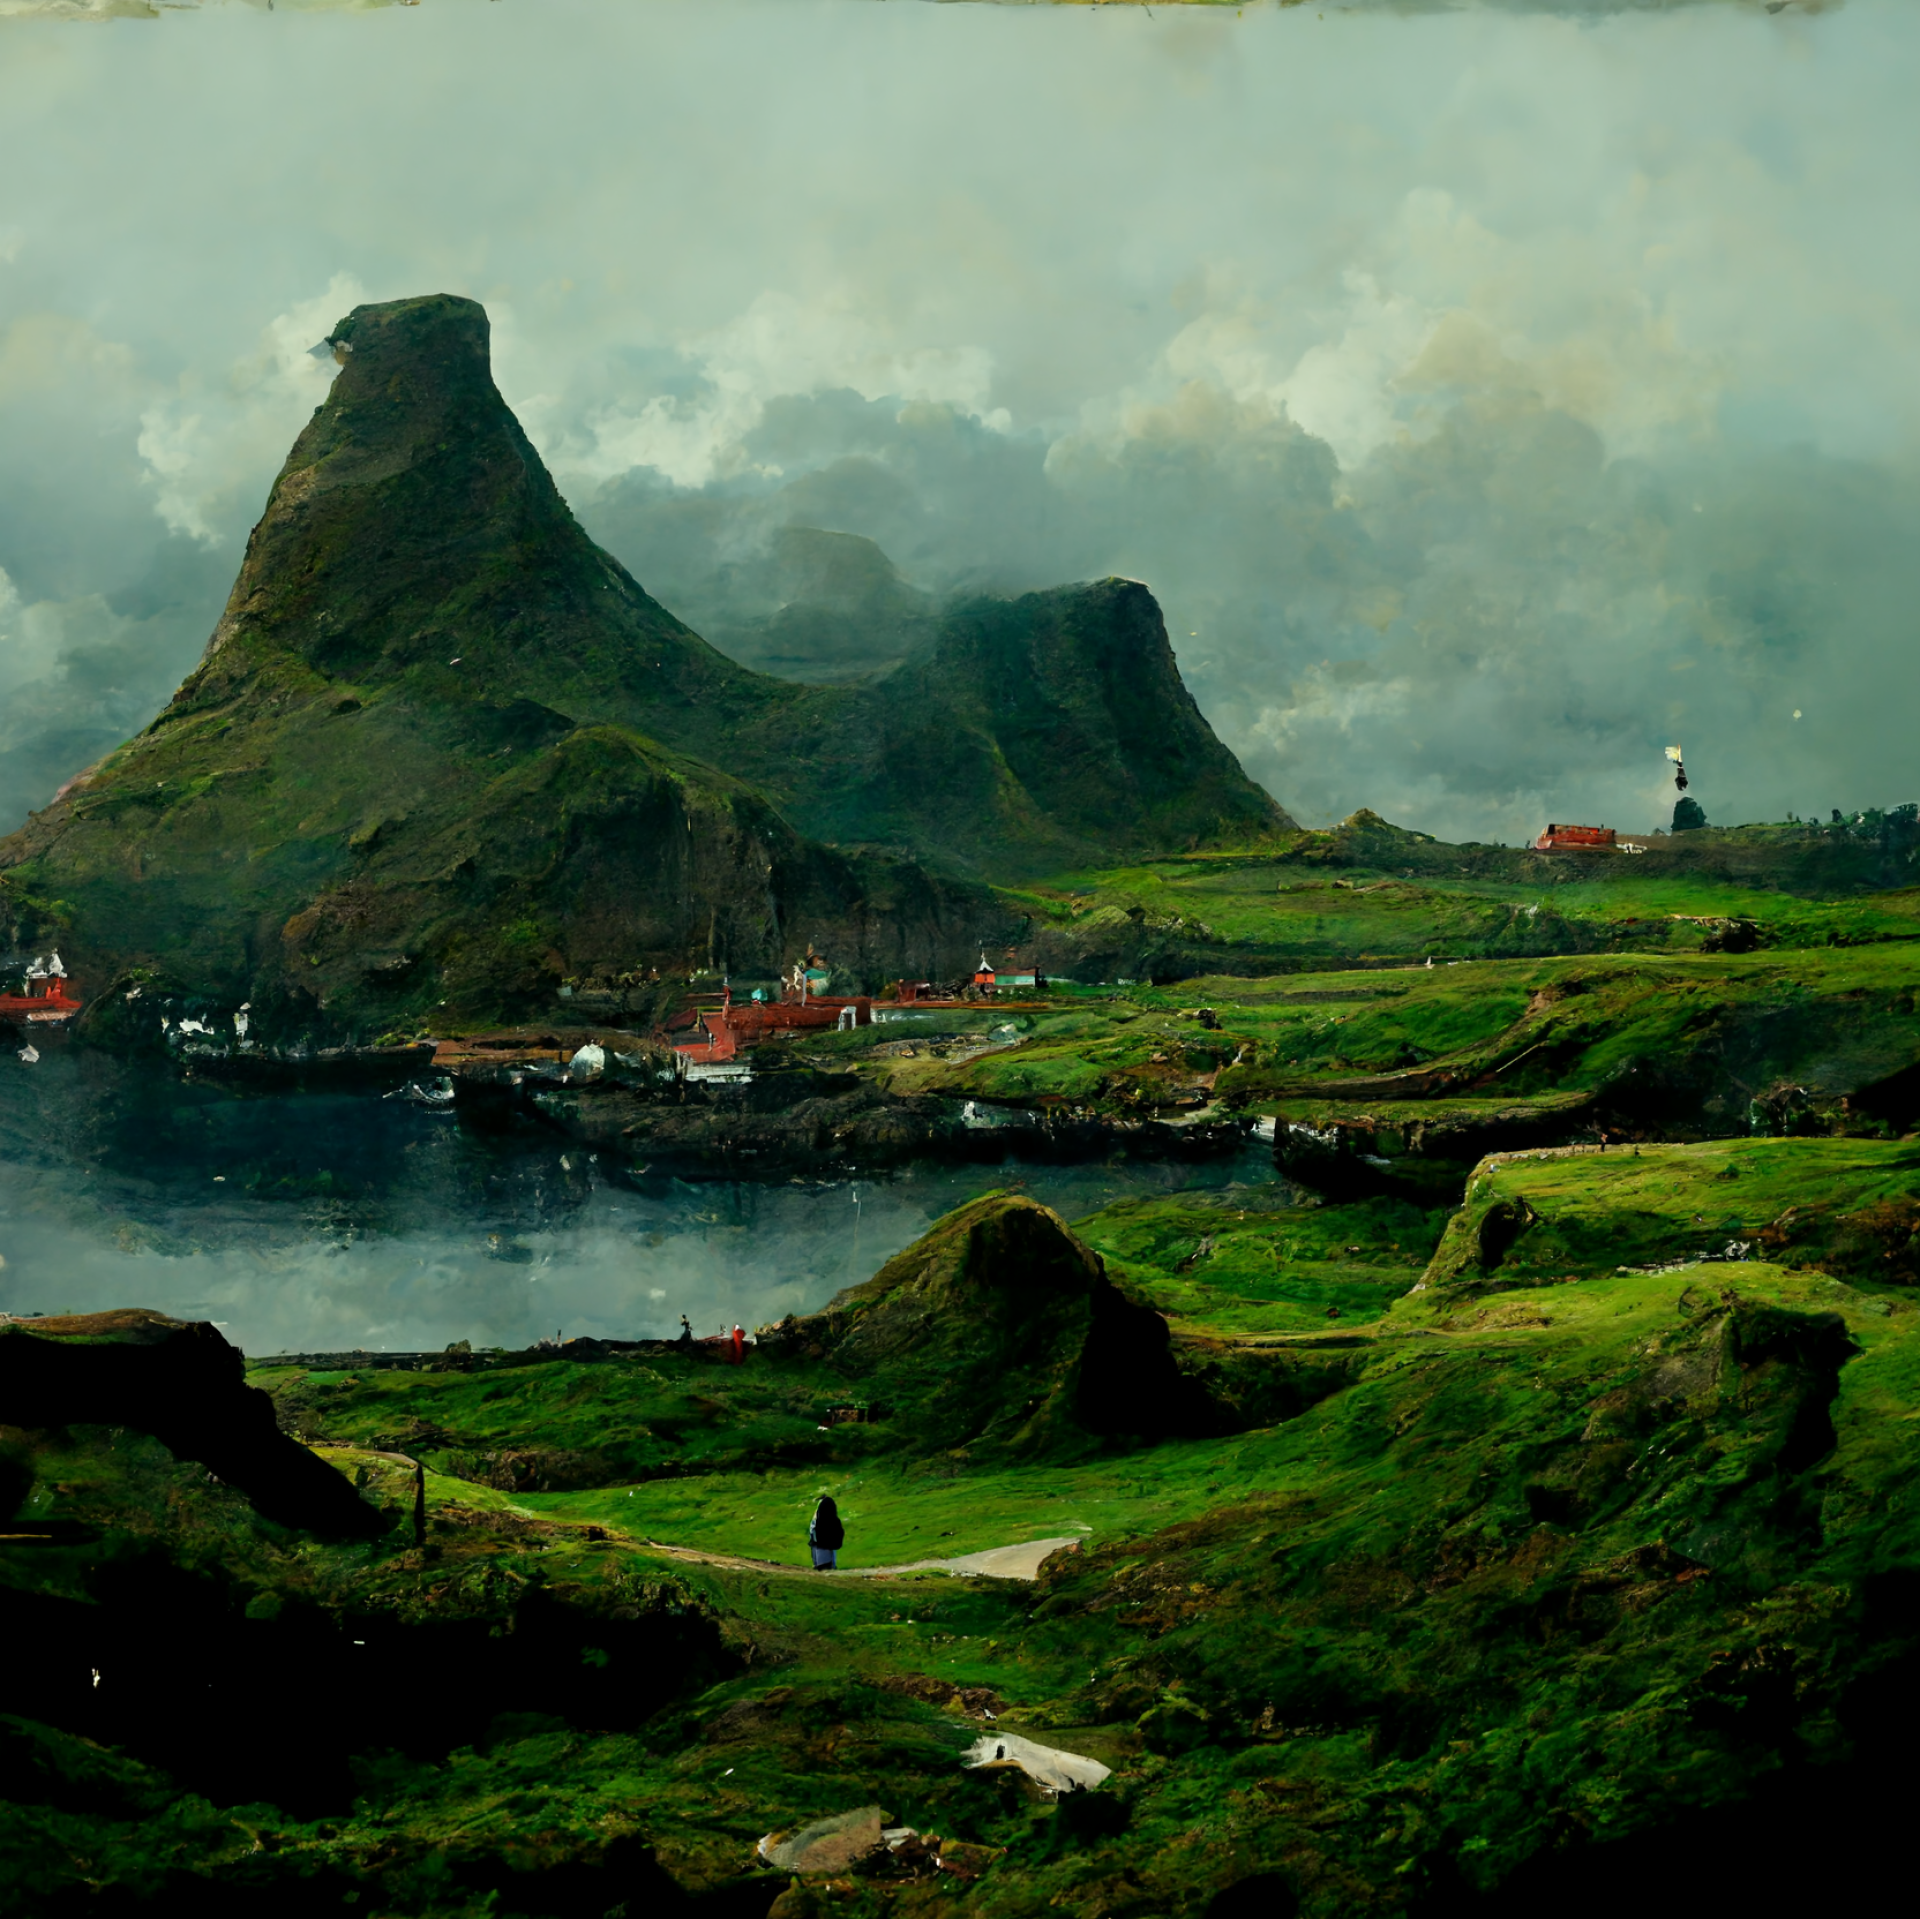 AI-generated image from Midjourney, the Faroe Islands inspired by Hieronymus Bosch.